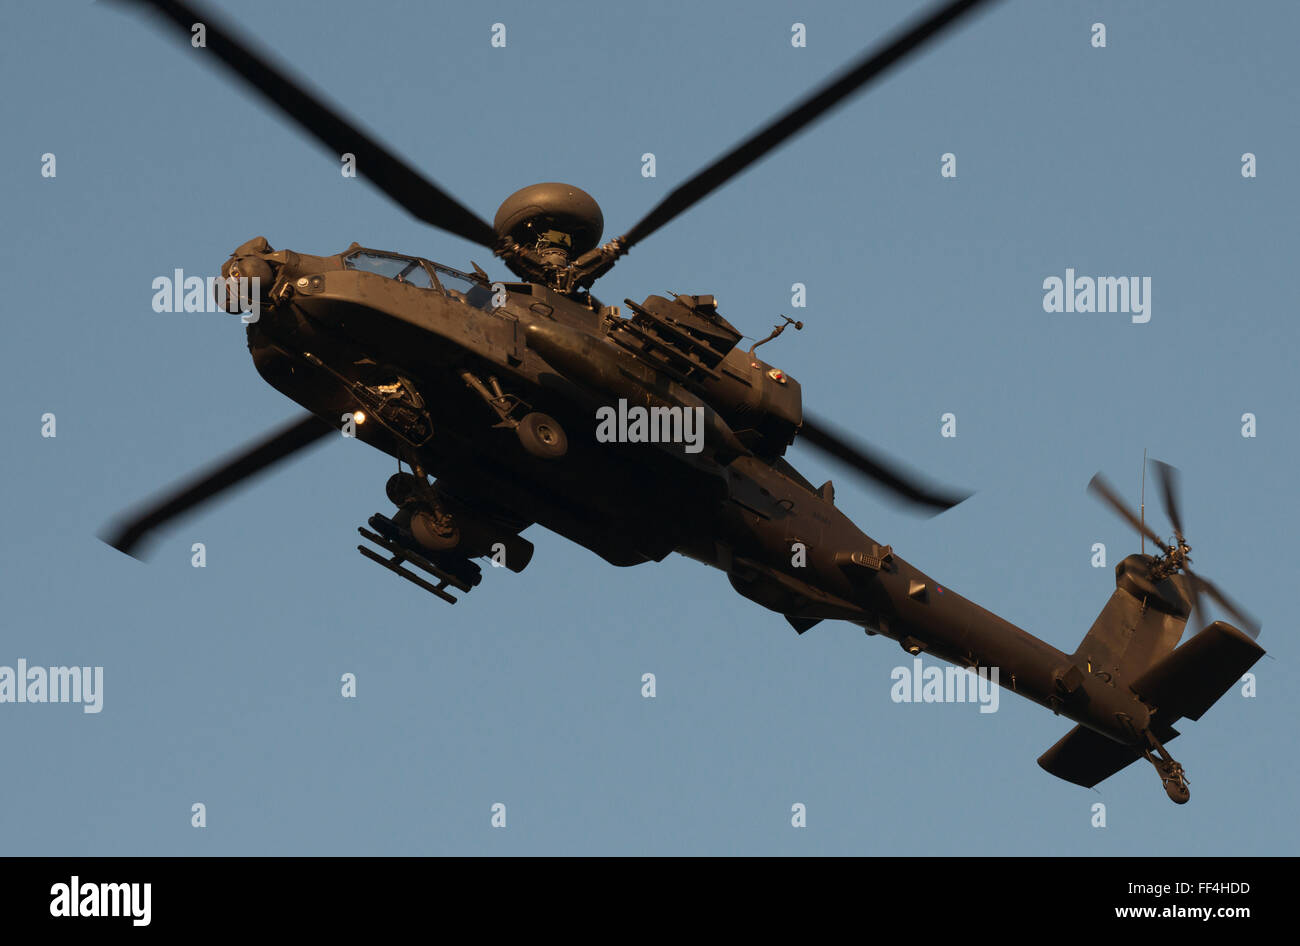 British Army Air Corps AgustaWestland Apache attack helicopter Stock Photo